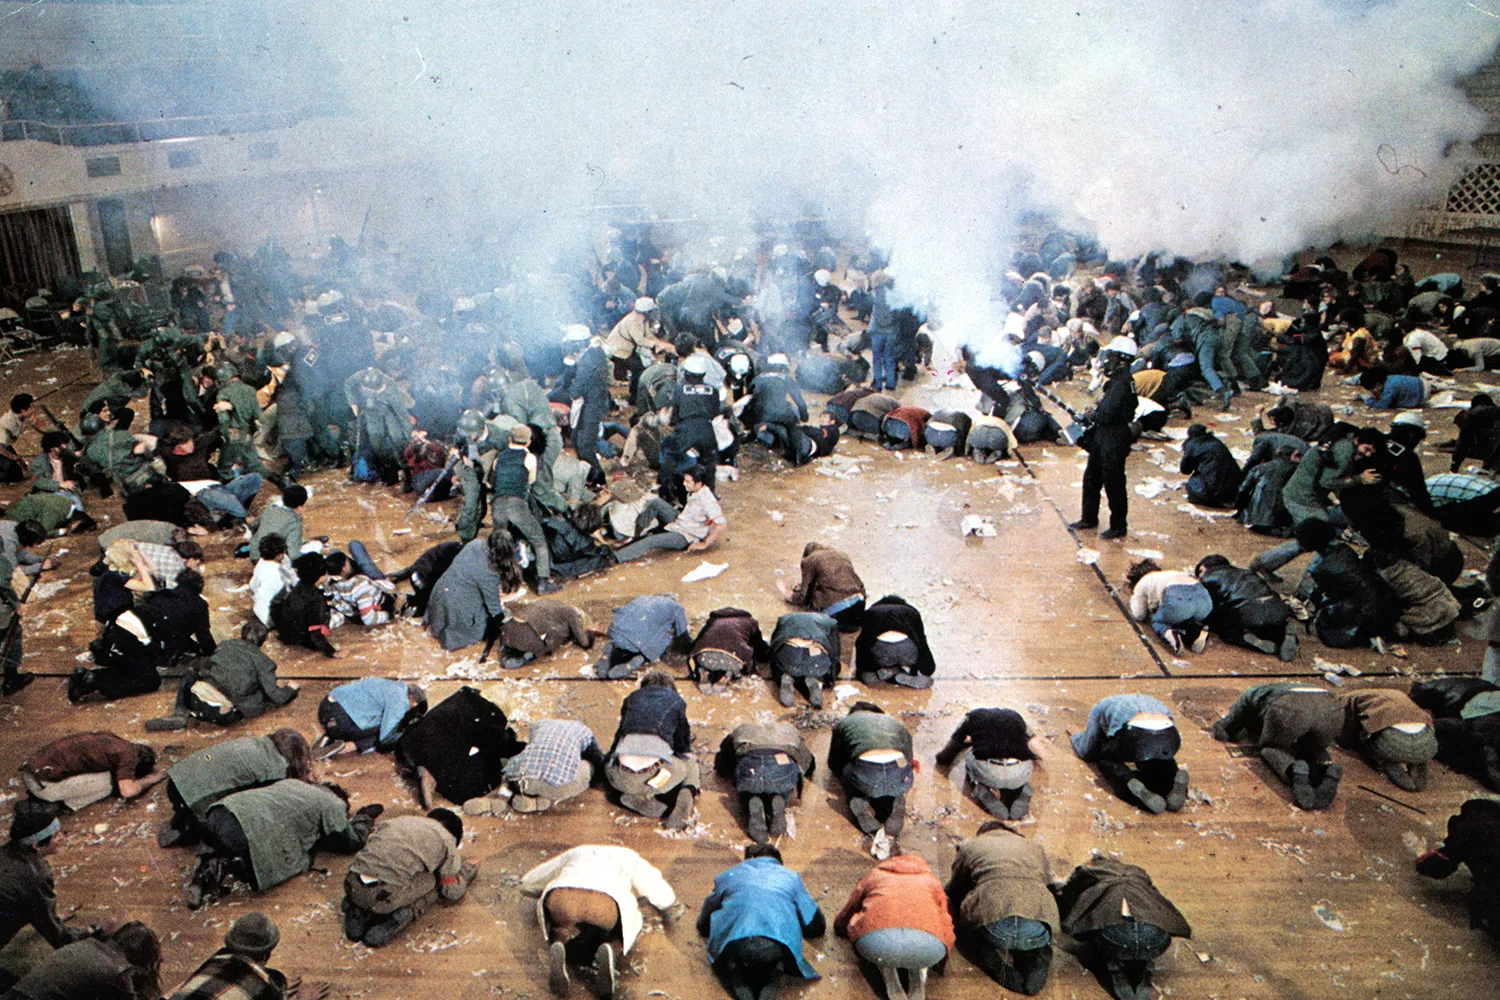 A crowd of students kneel on the ground with their faces pressed against it as they duck from clouds of tear gas in a film still from 1968.